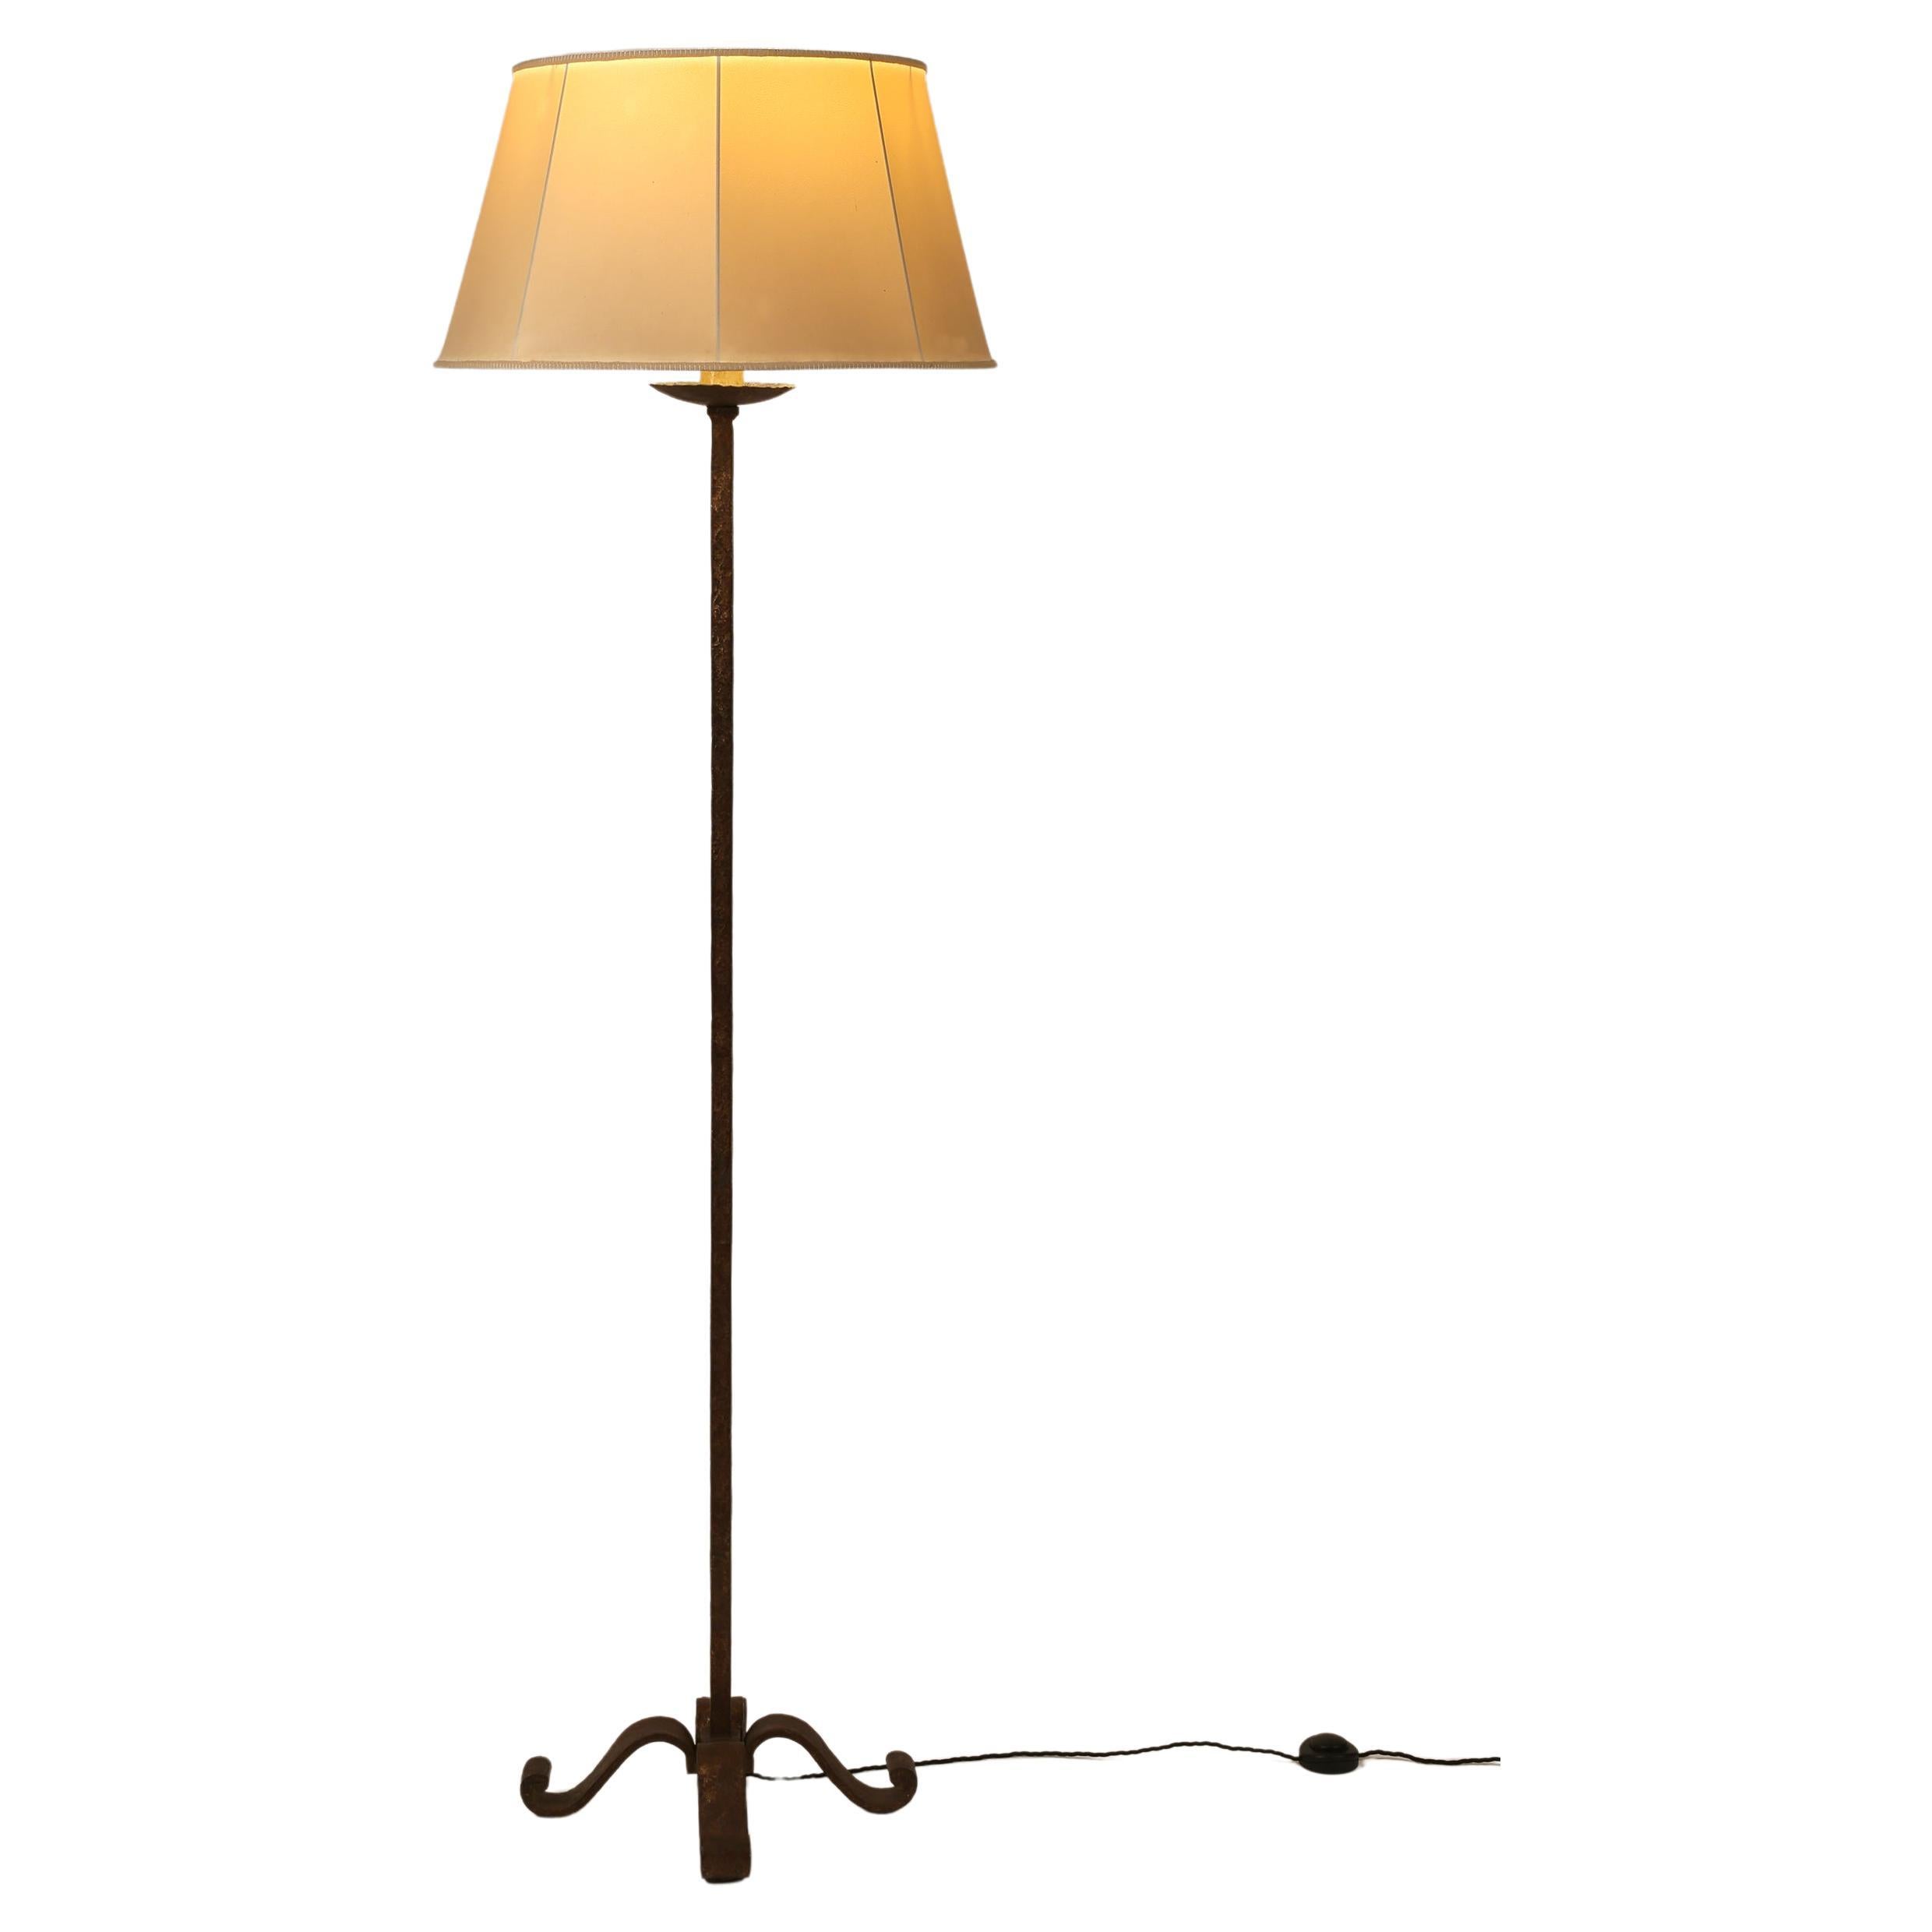 French 1940s Maison Ramsay Art Deco Floor Lamp In Gilt Forged Iron